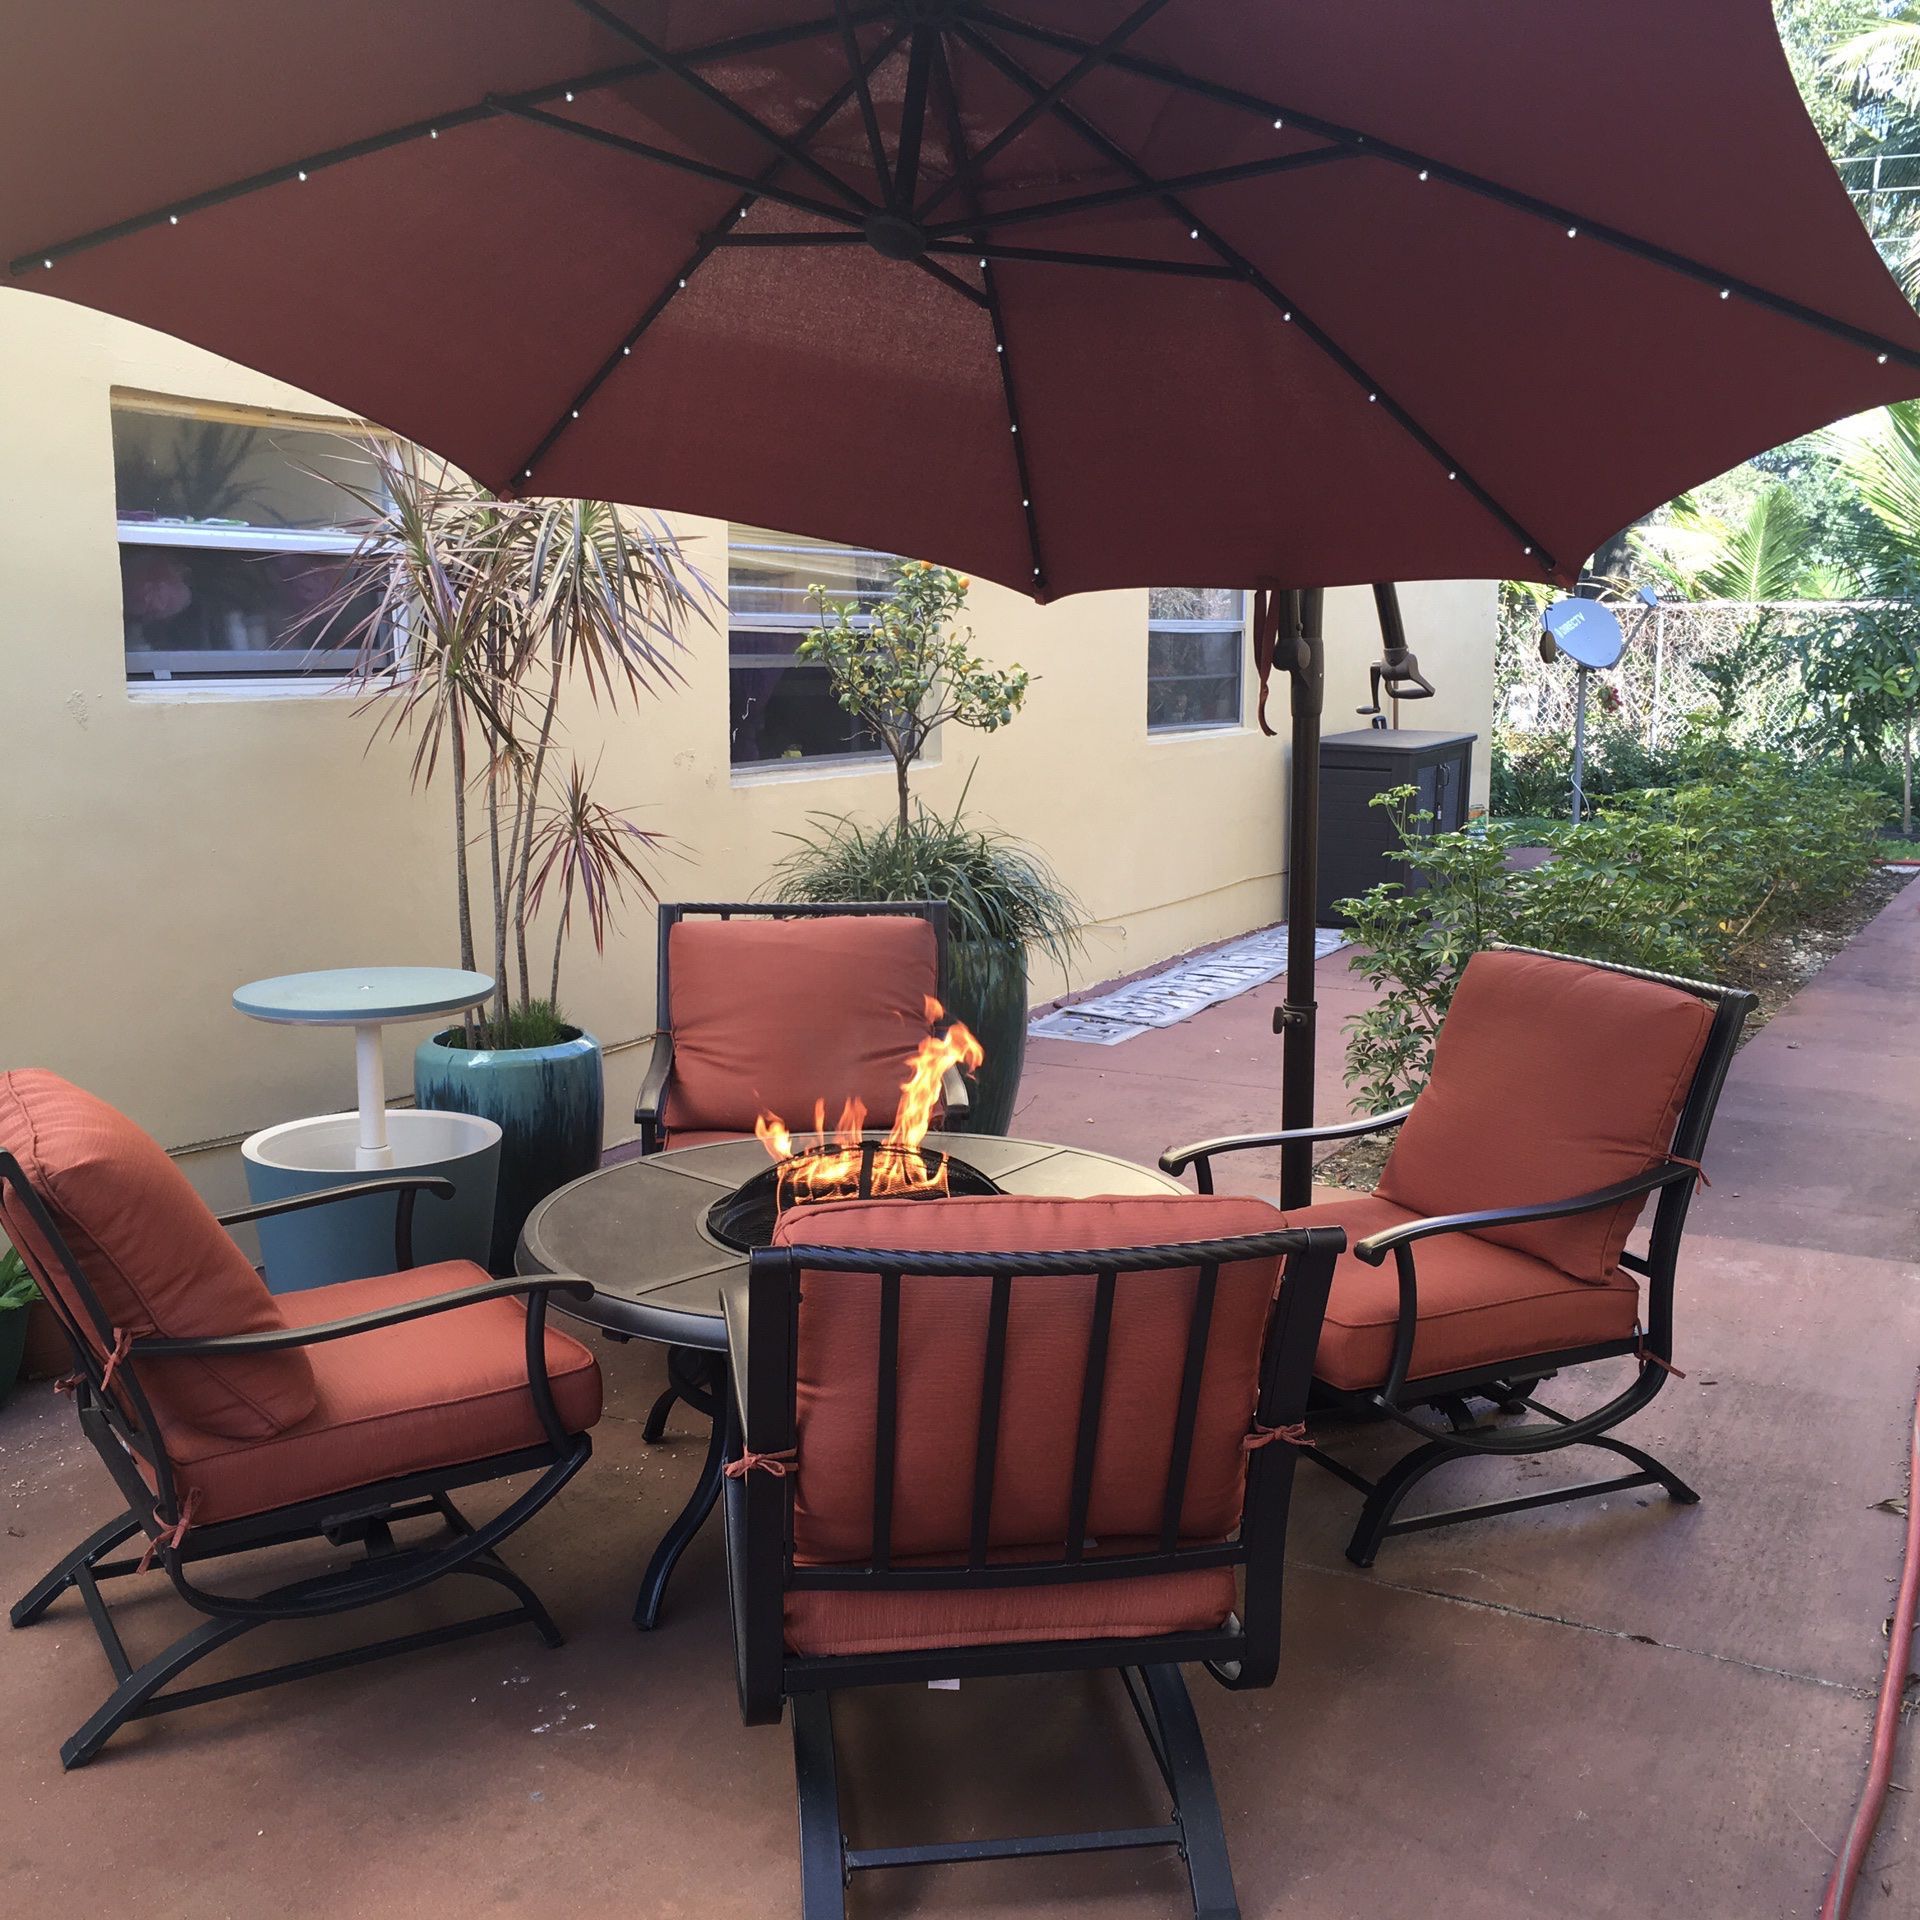 Fire Pit Patio Set w/4 chairs and heavy duty Solar Powered Light Up Umbrella PLUS more